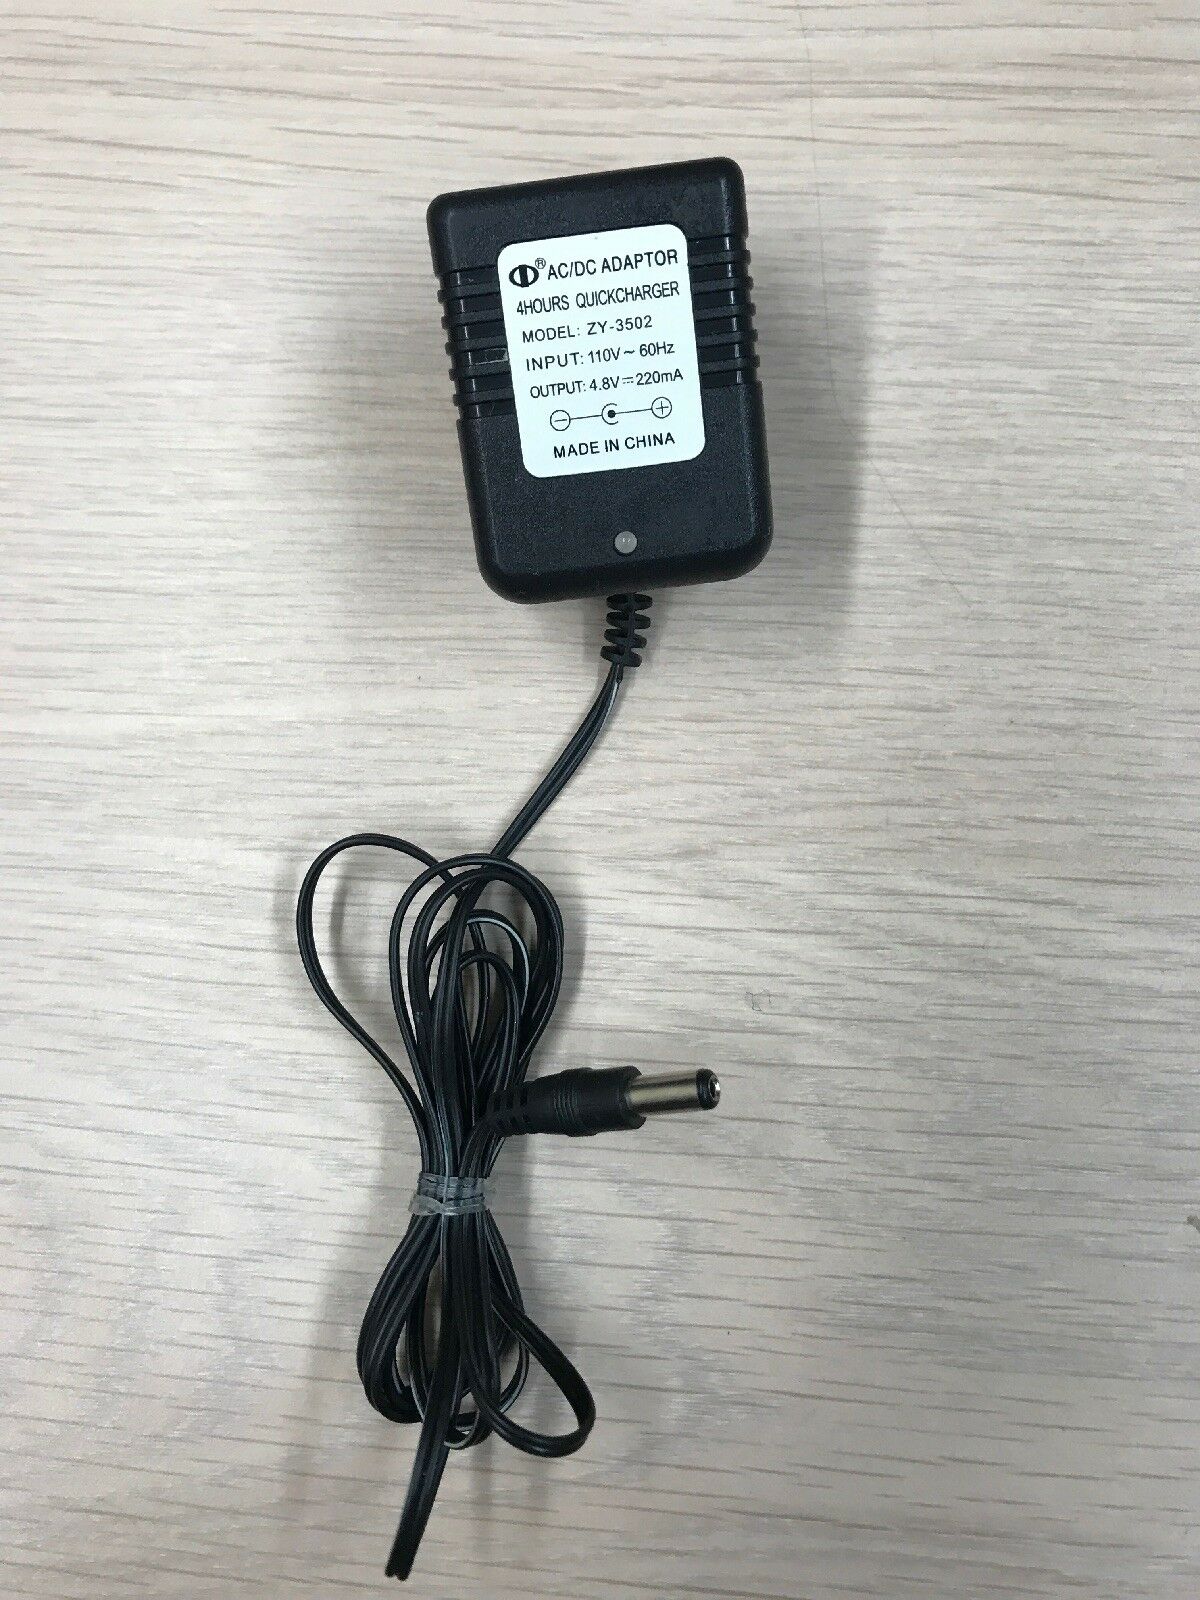 *Brand NEW*4 Hours Quick Charger ZY-3502 4.8V 220mA AC/DC Adapter POWER SUPPLY